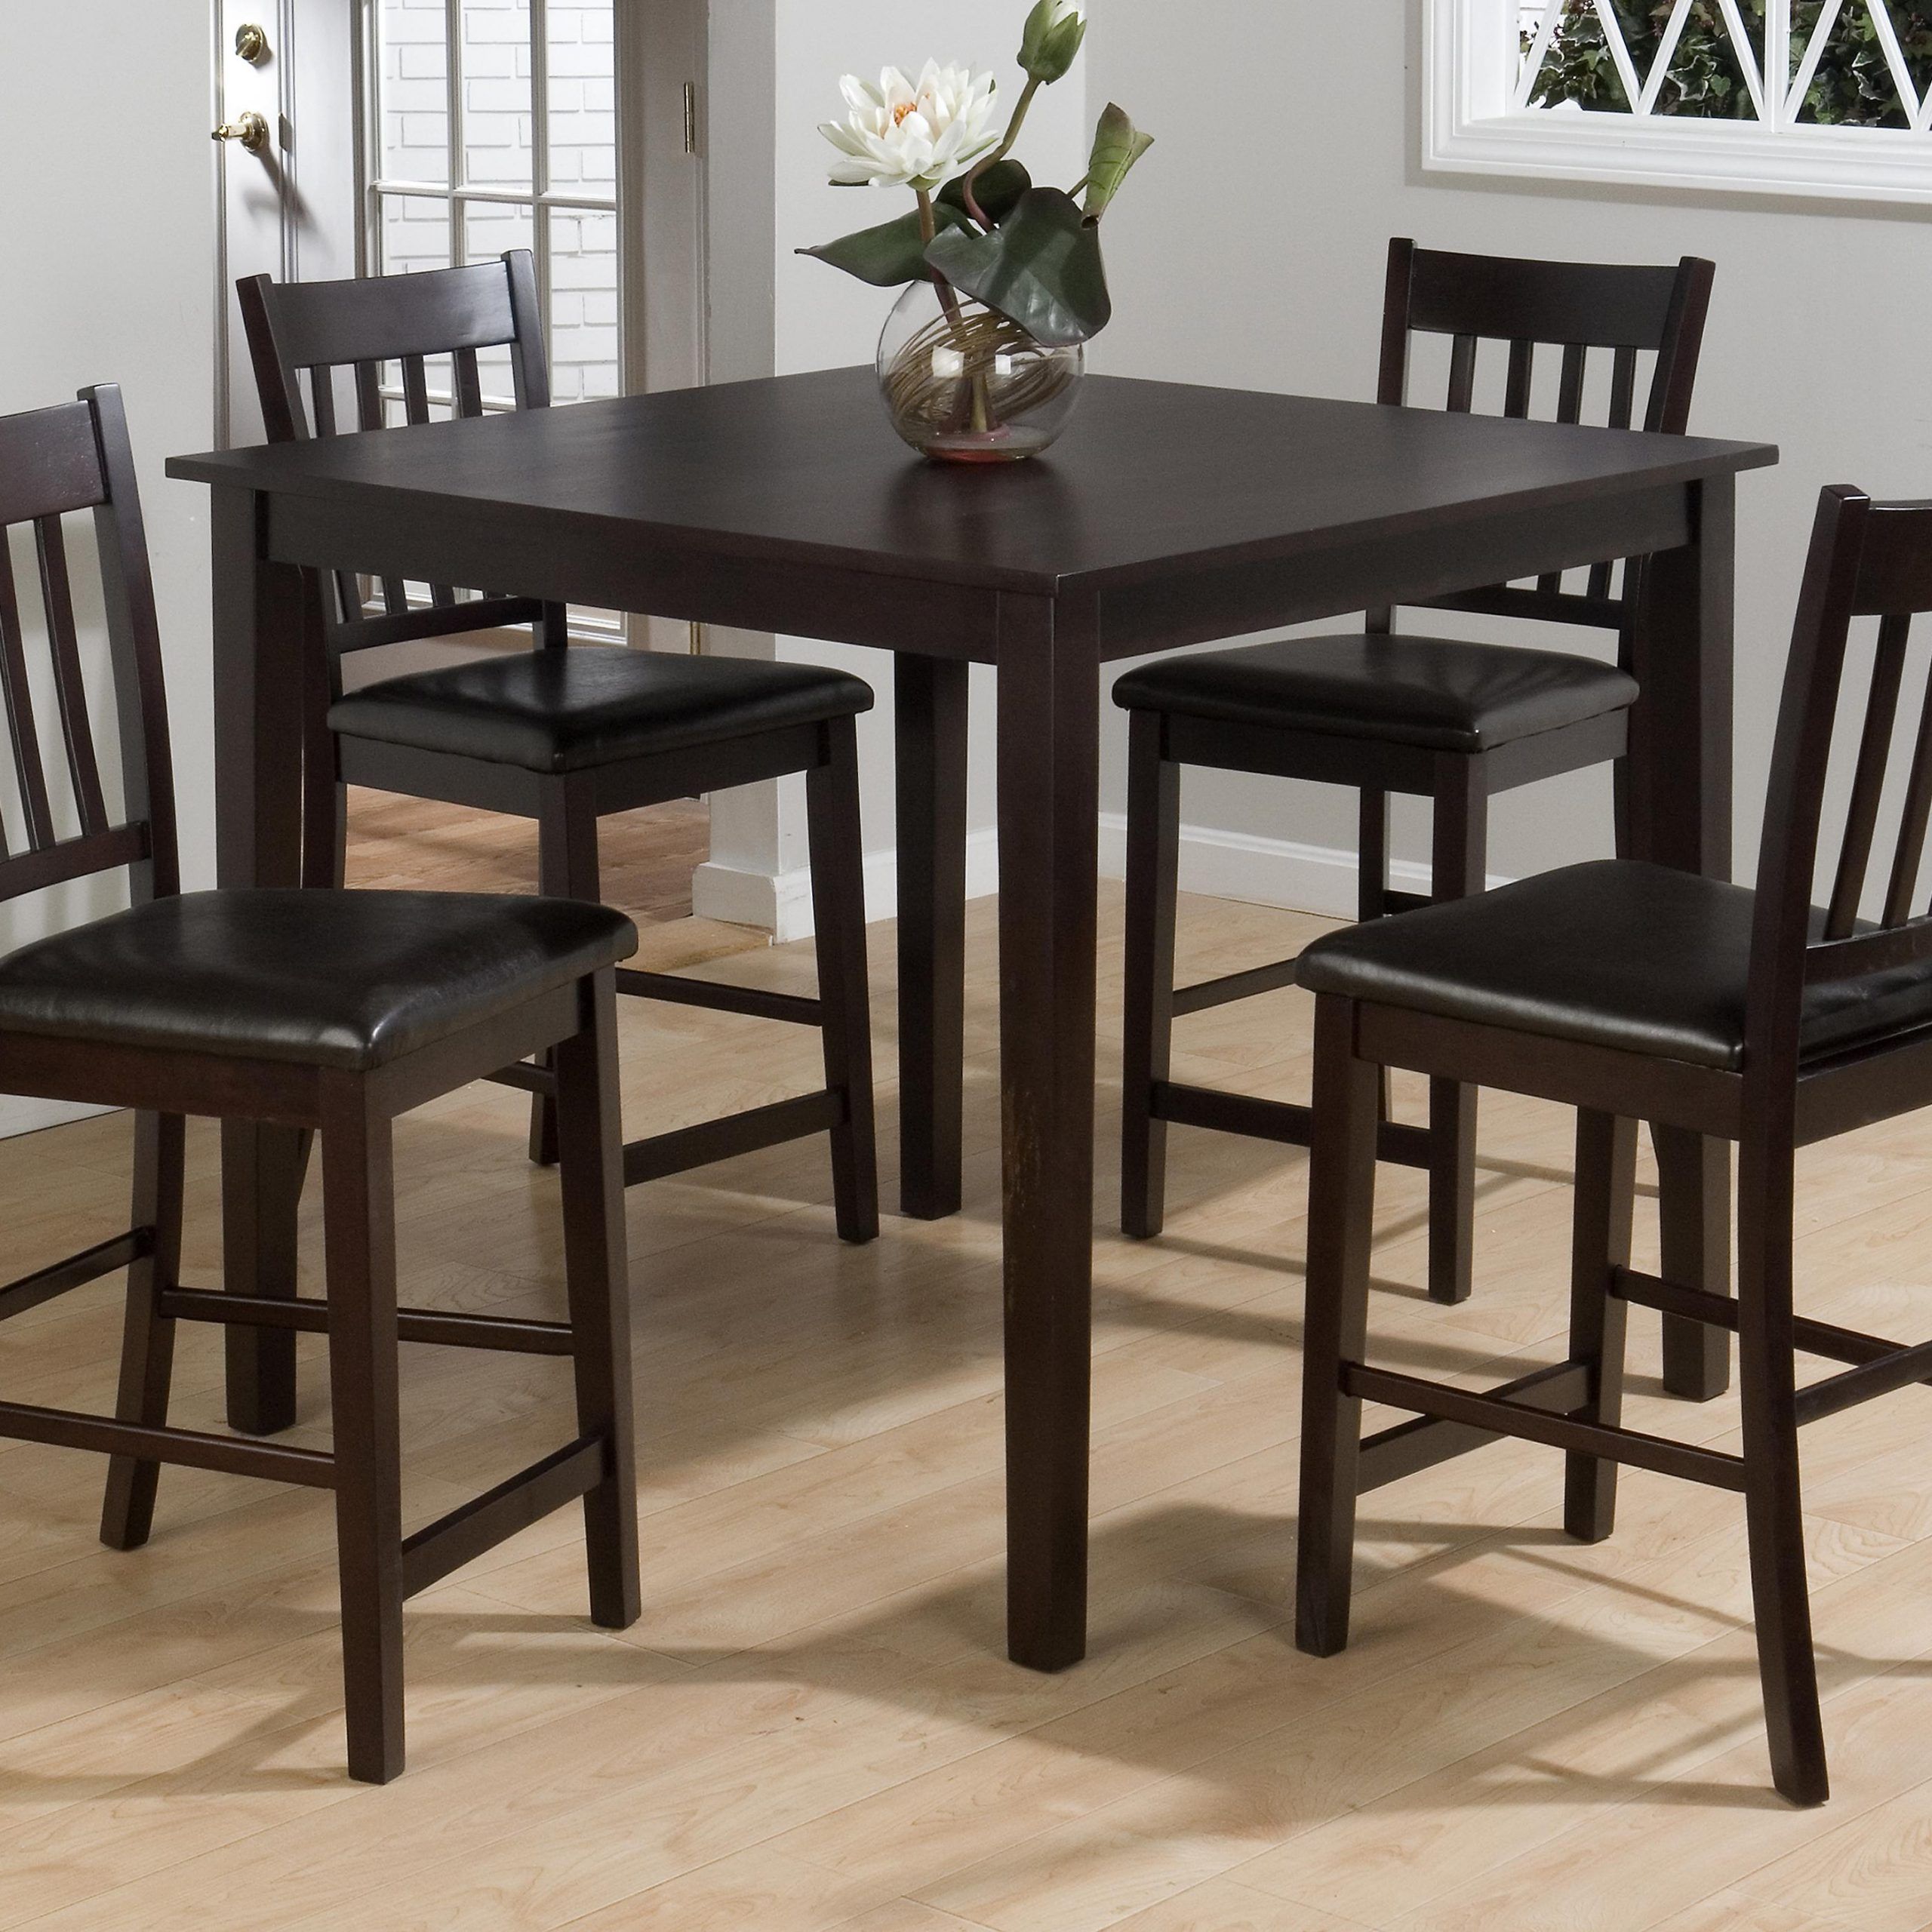 Jofran Marin County Merlot 5 Piece Counter Height Table & Counter Chair Intended For 5 Piece Cafe Dining Sets (View 6 of 15)